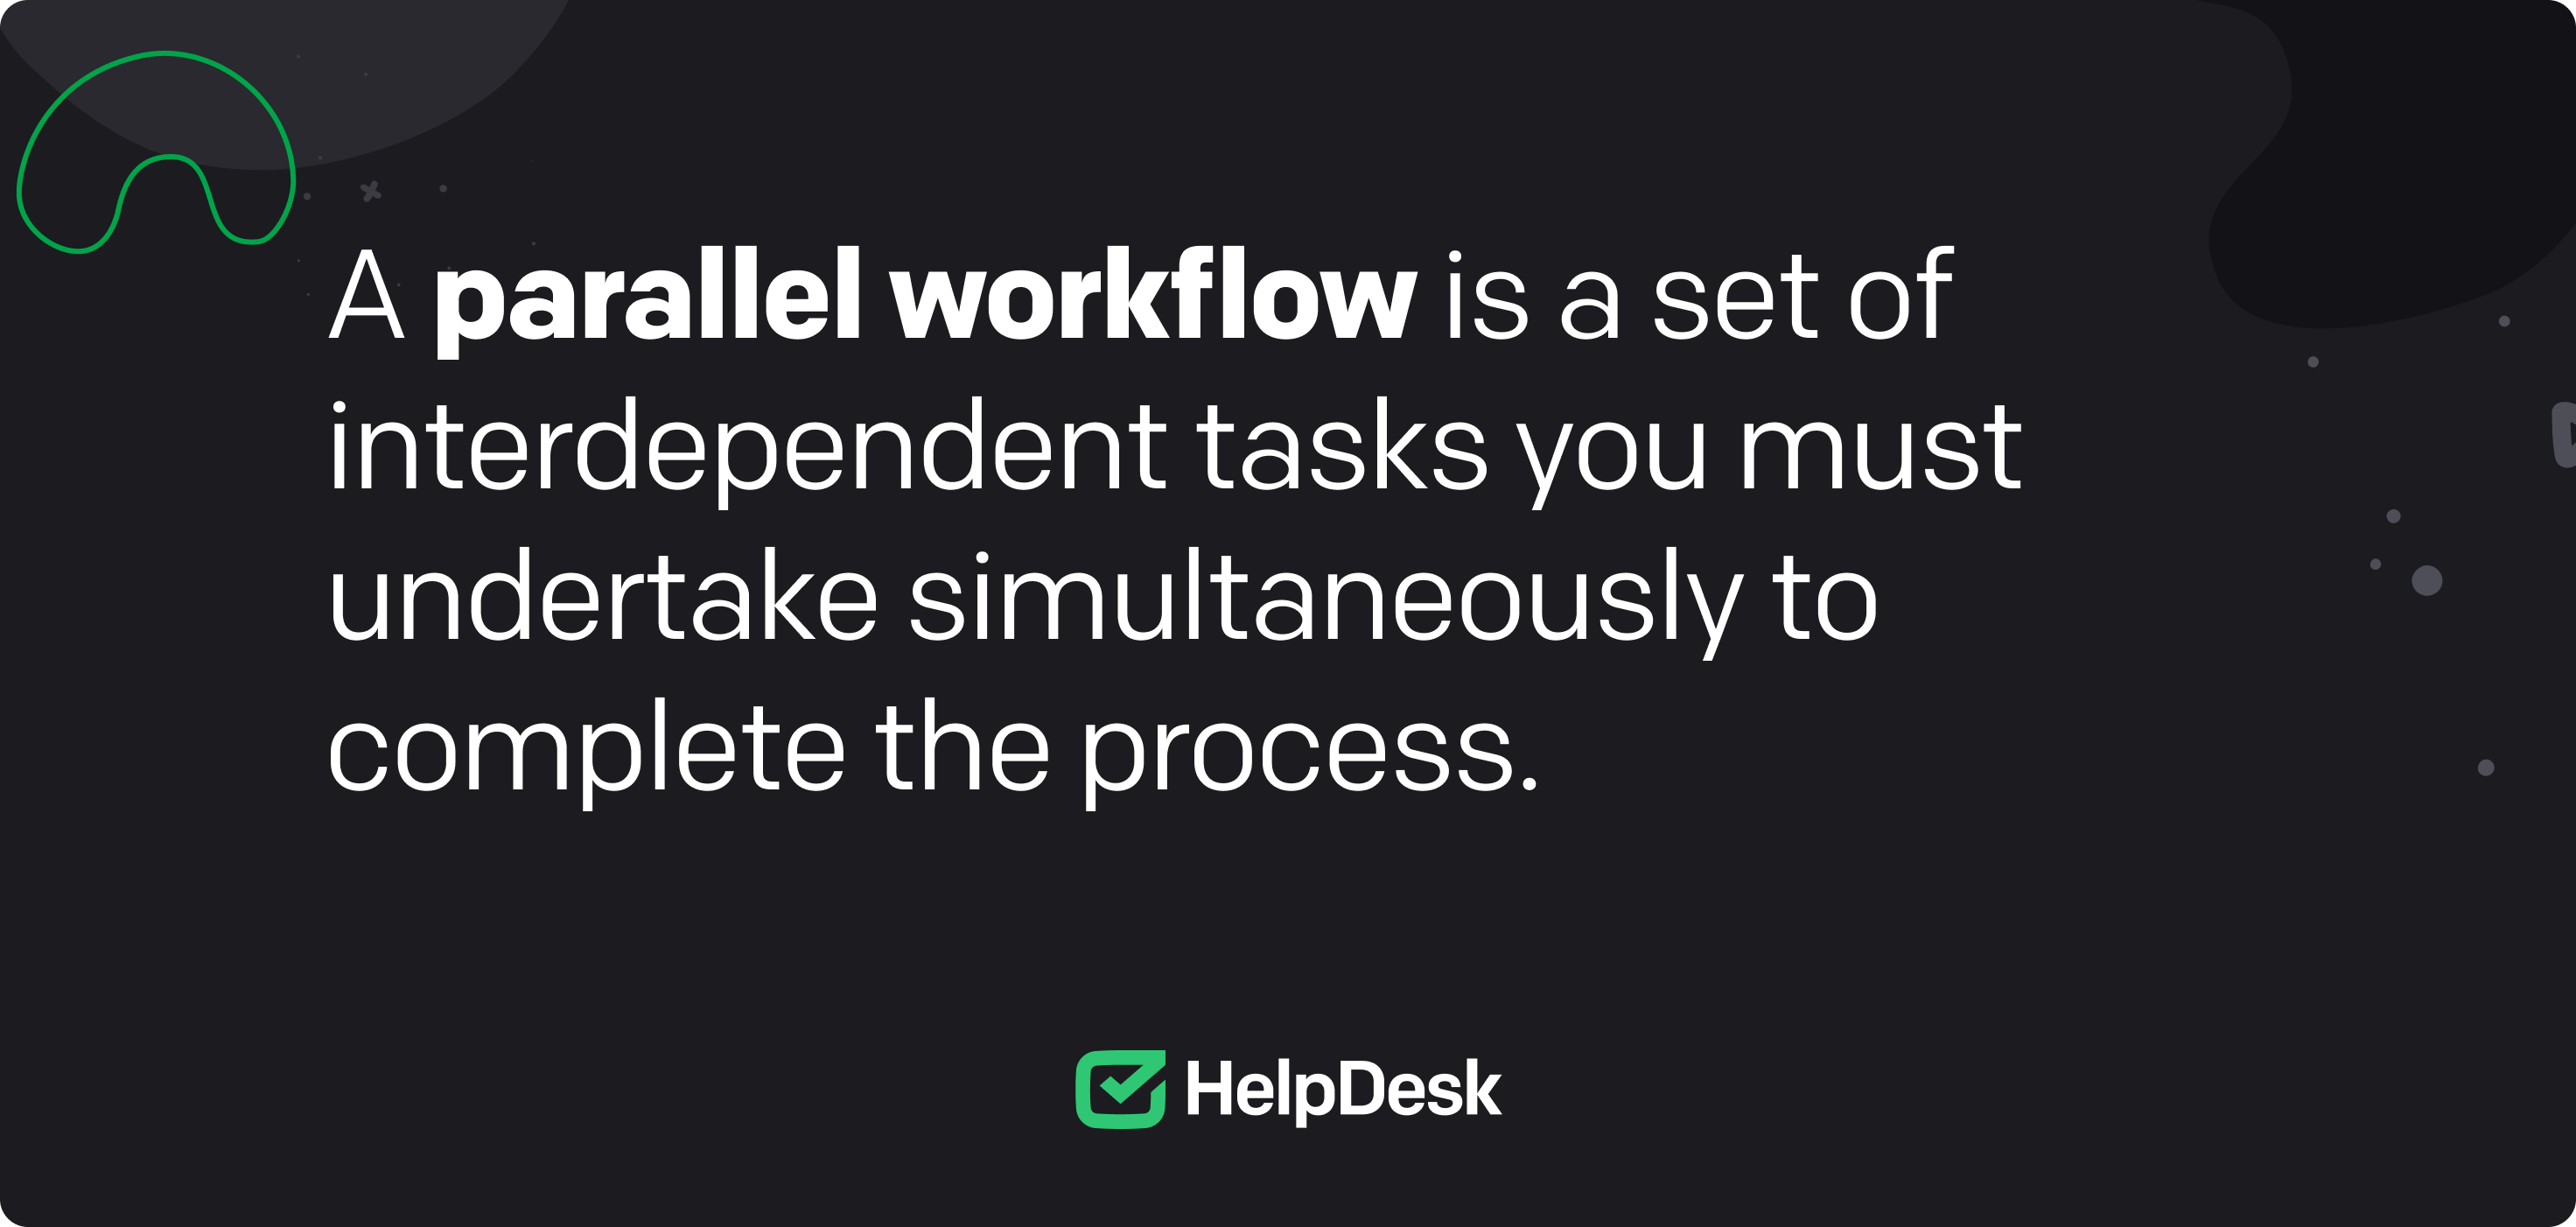 A definition of the parallel workflow.